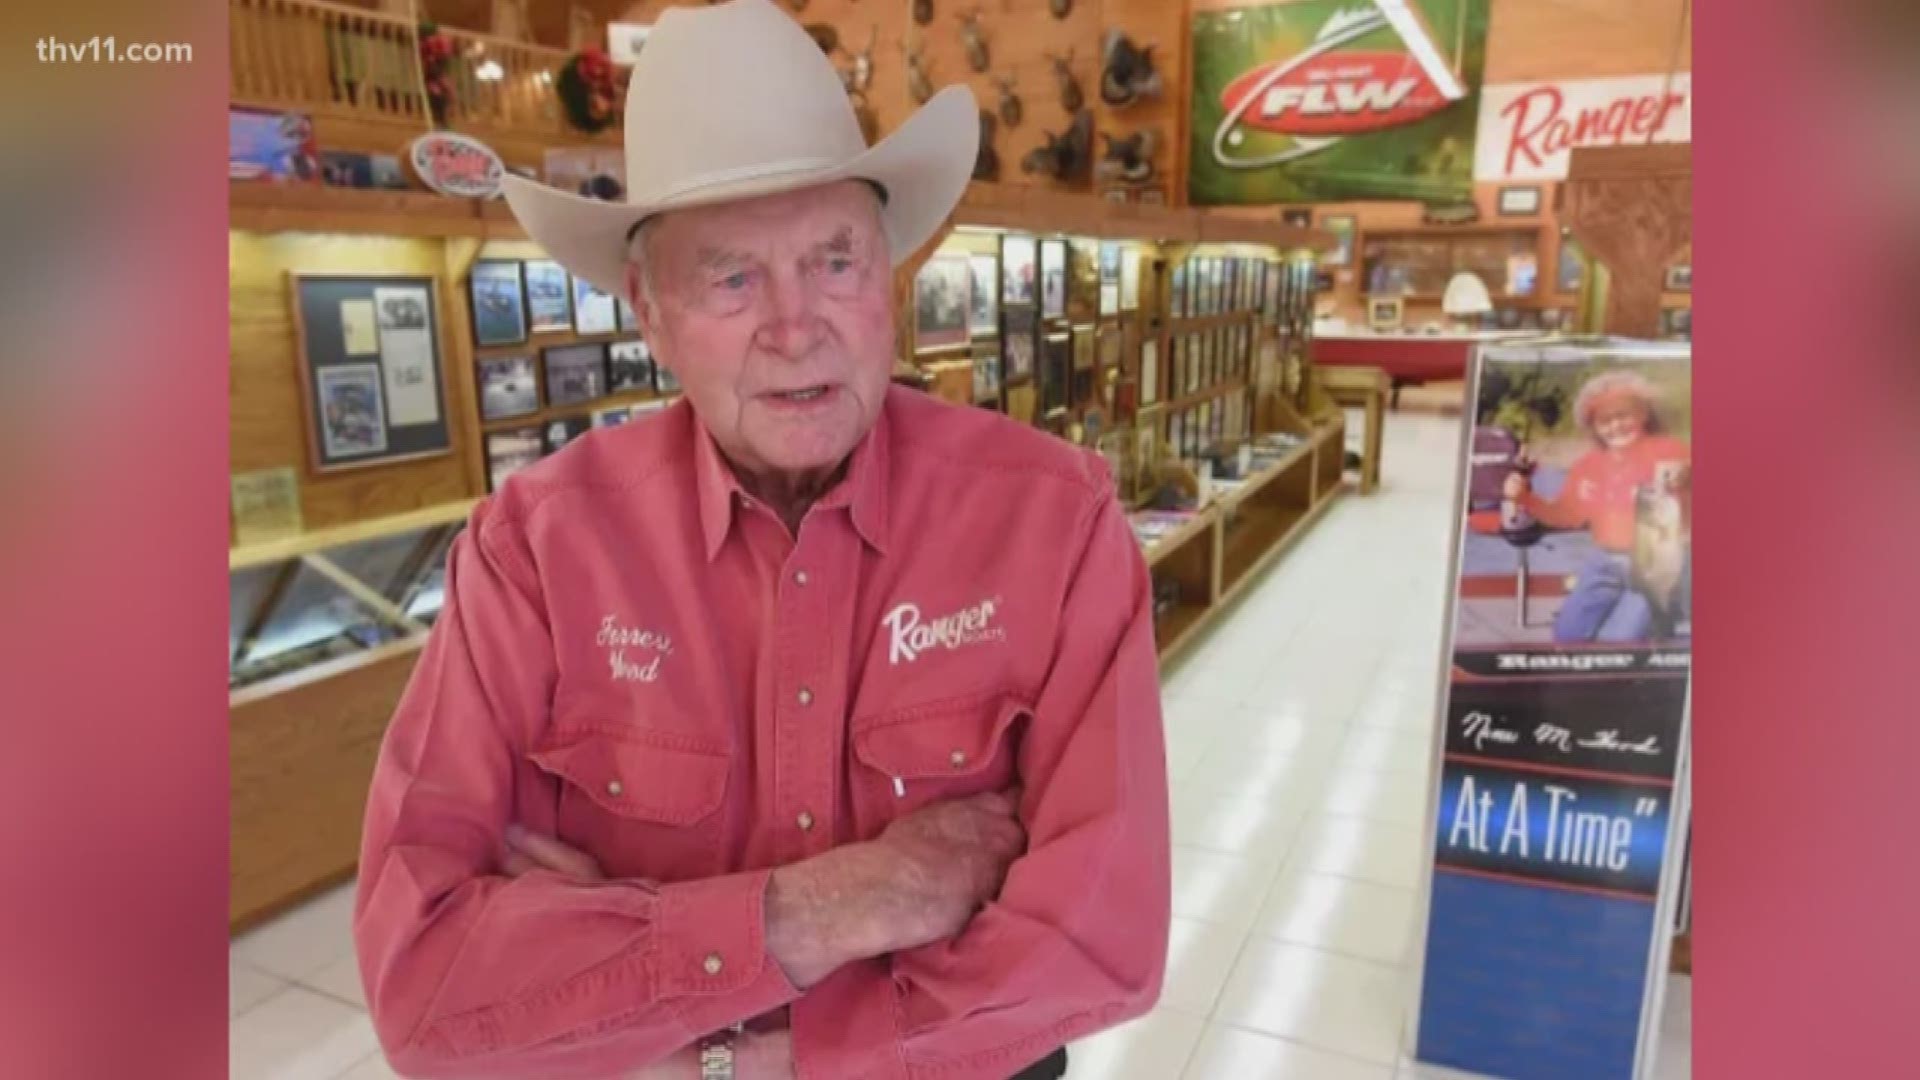 Forrest Wood, the founder of Ranger Boots, has passed away.